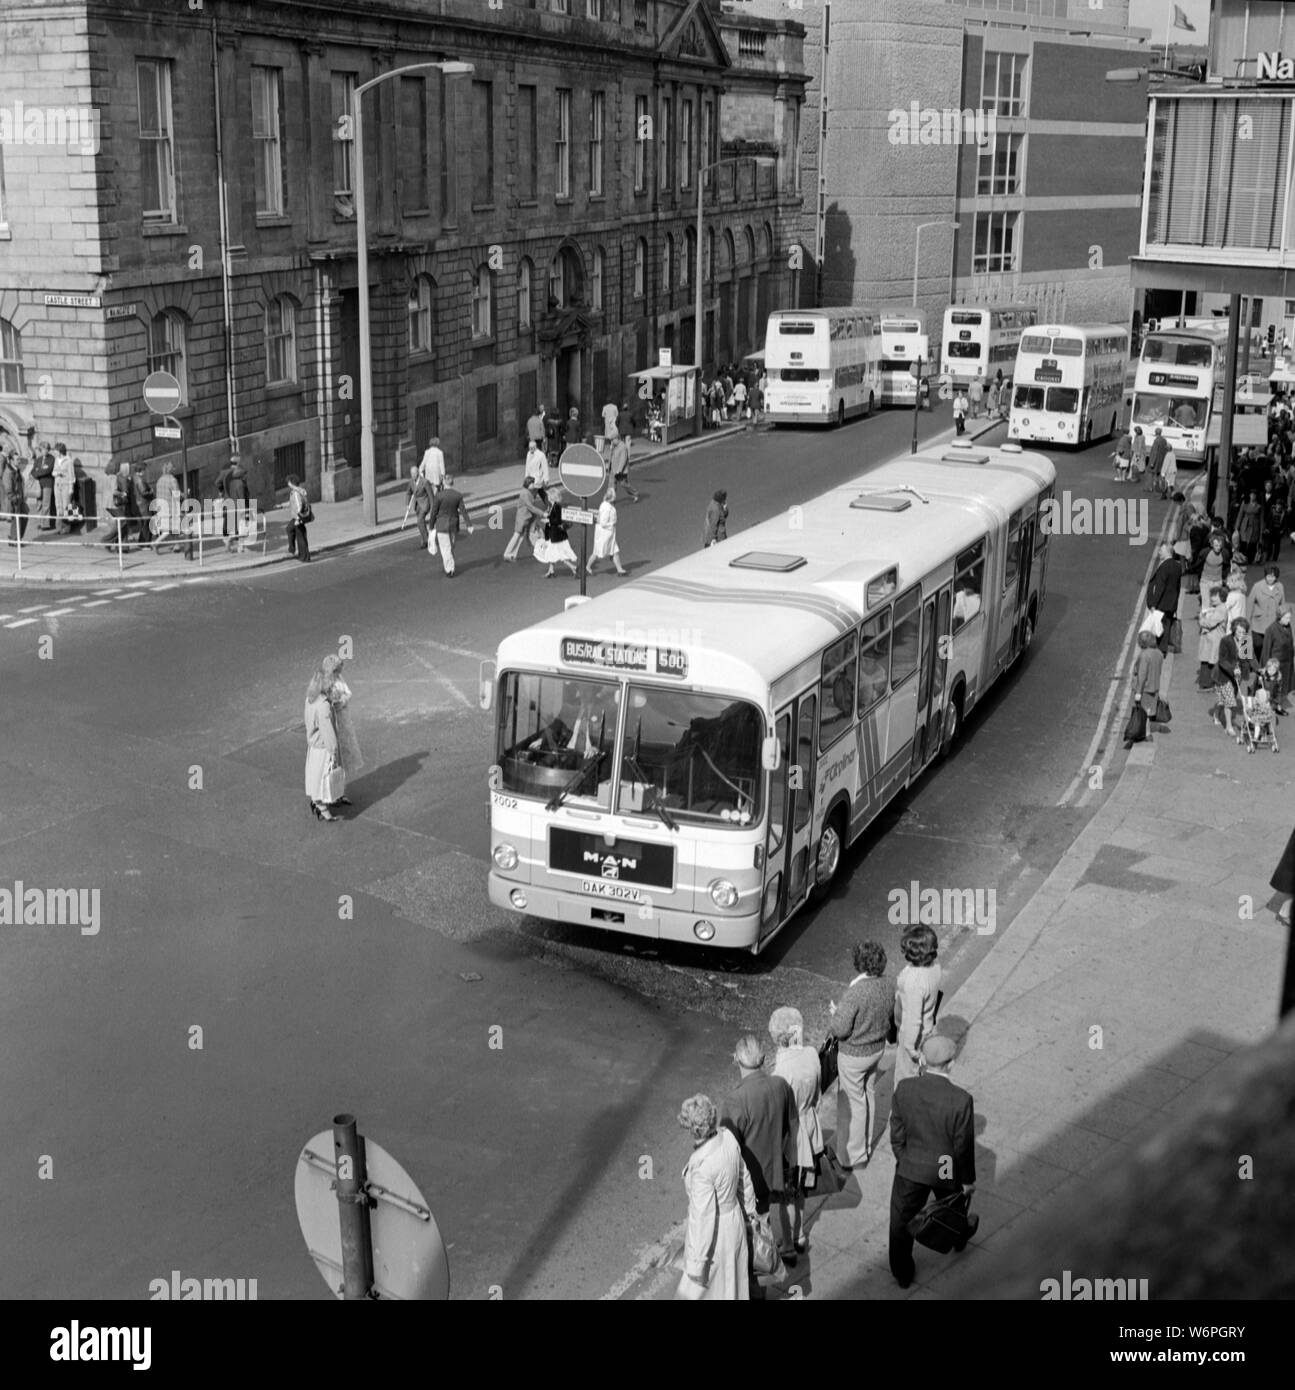 MAN Bendy bus new in 1979 on Waingate, Sheffield. Note the Old Town Hall/ Old Court House in the background while it was fully operational. The Grade II listed building dates back to 1810 but sadly now has fallen into disrepair and dereliction. Stock Photo